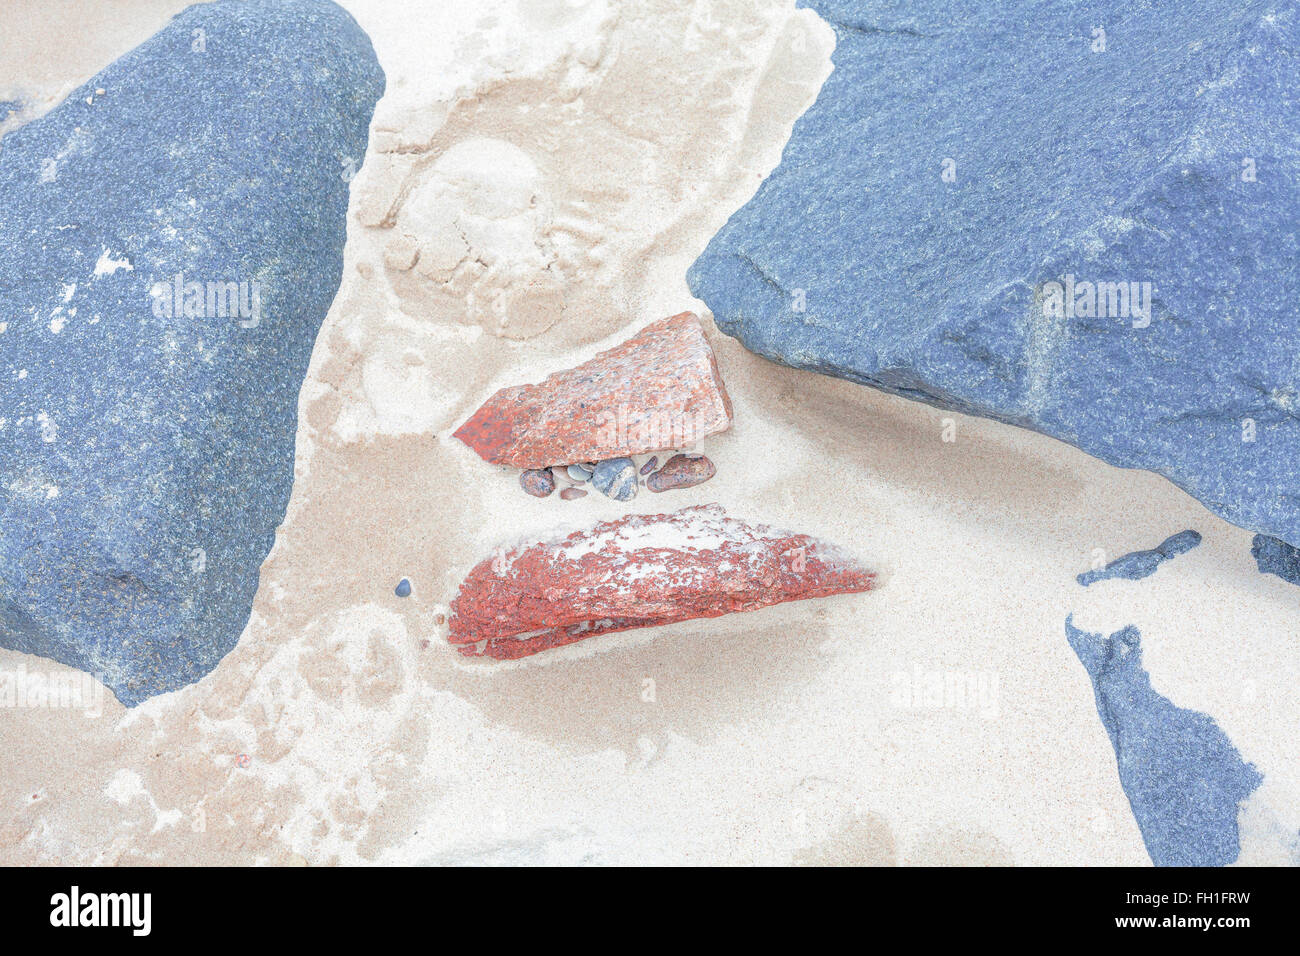 Rocks and stones on sand, abstract nature background. Stock Photo